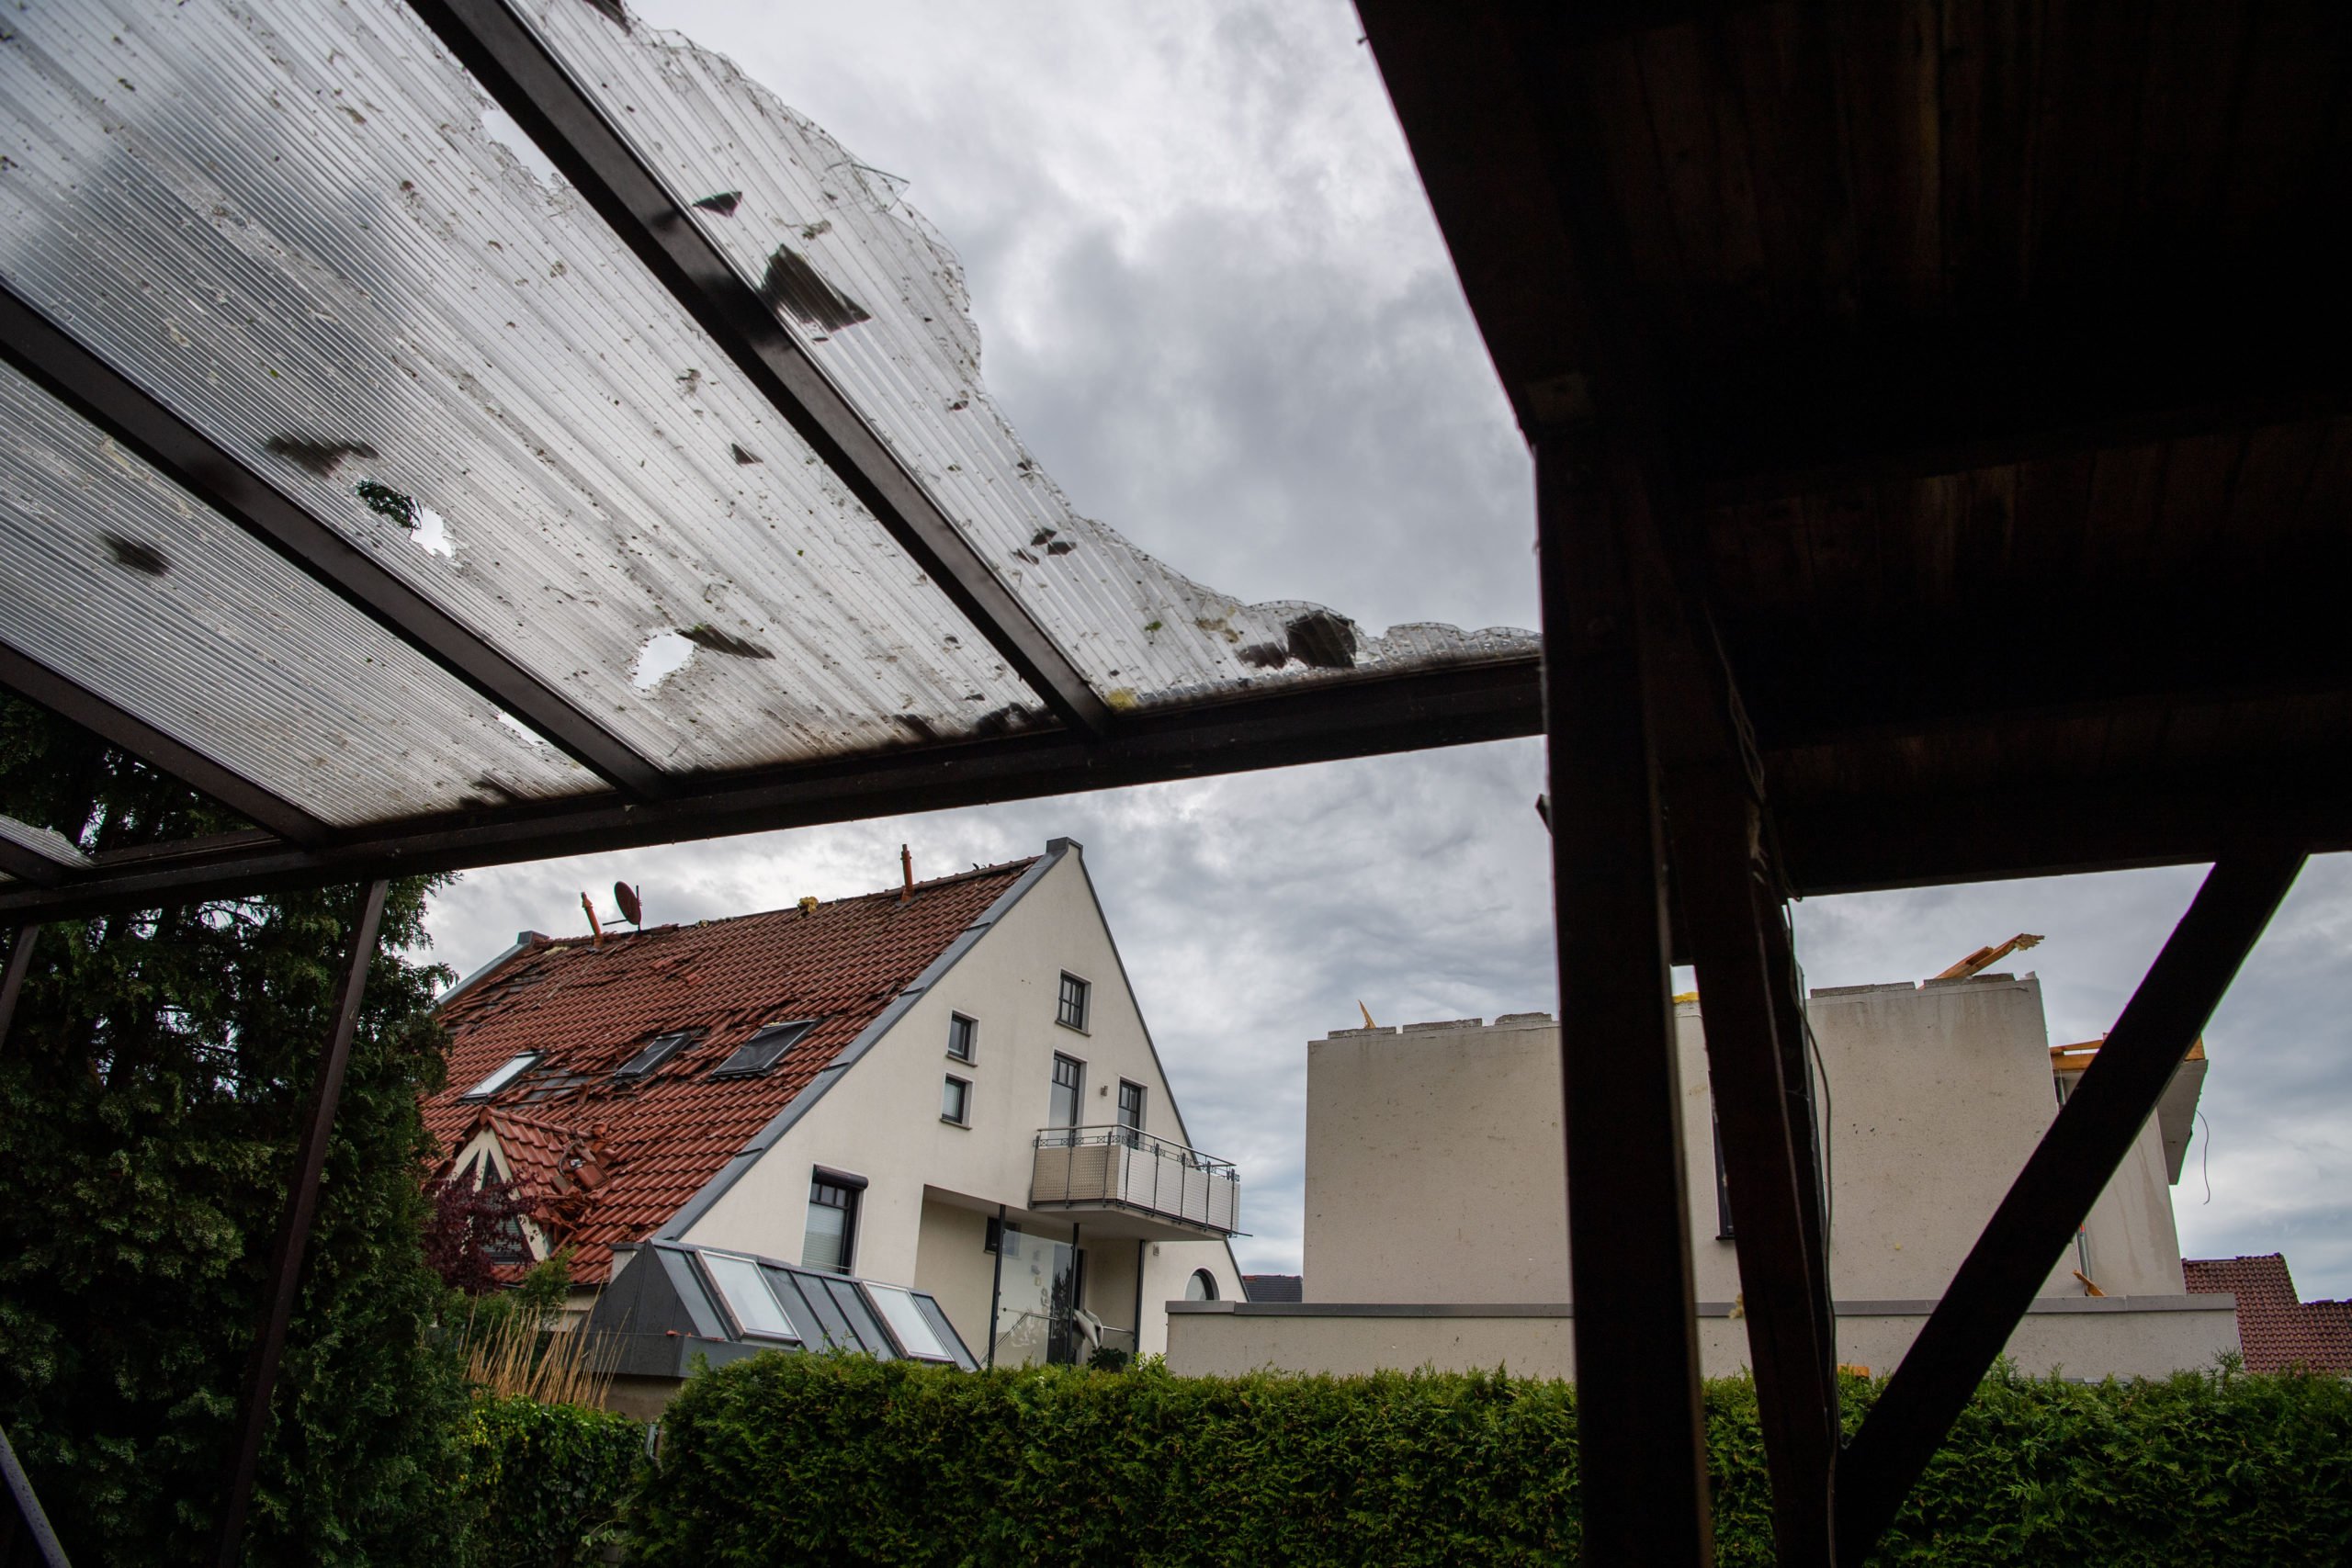 Damaged roof in Paderborn